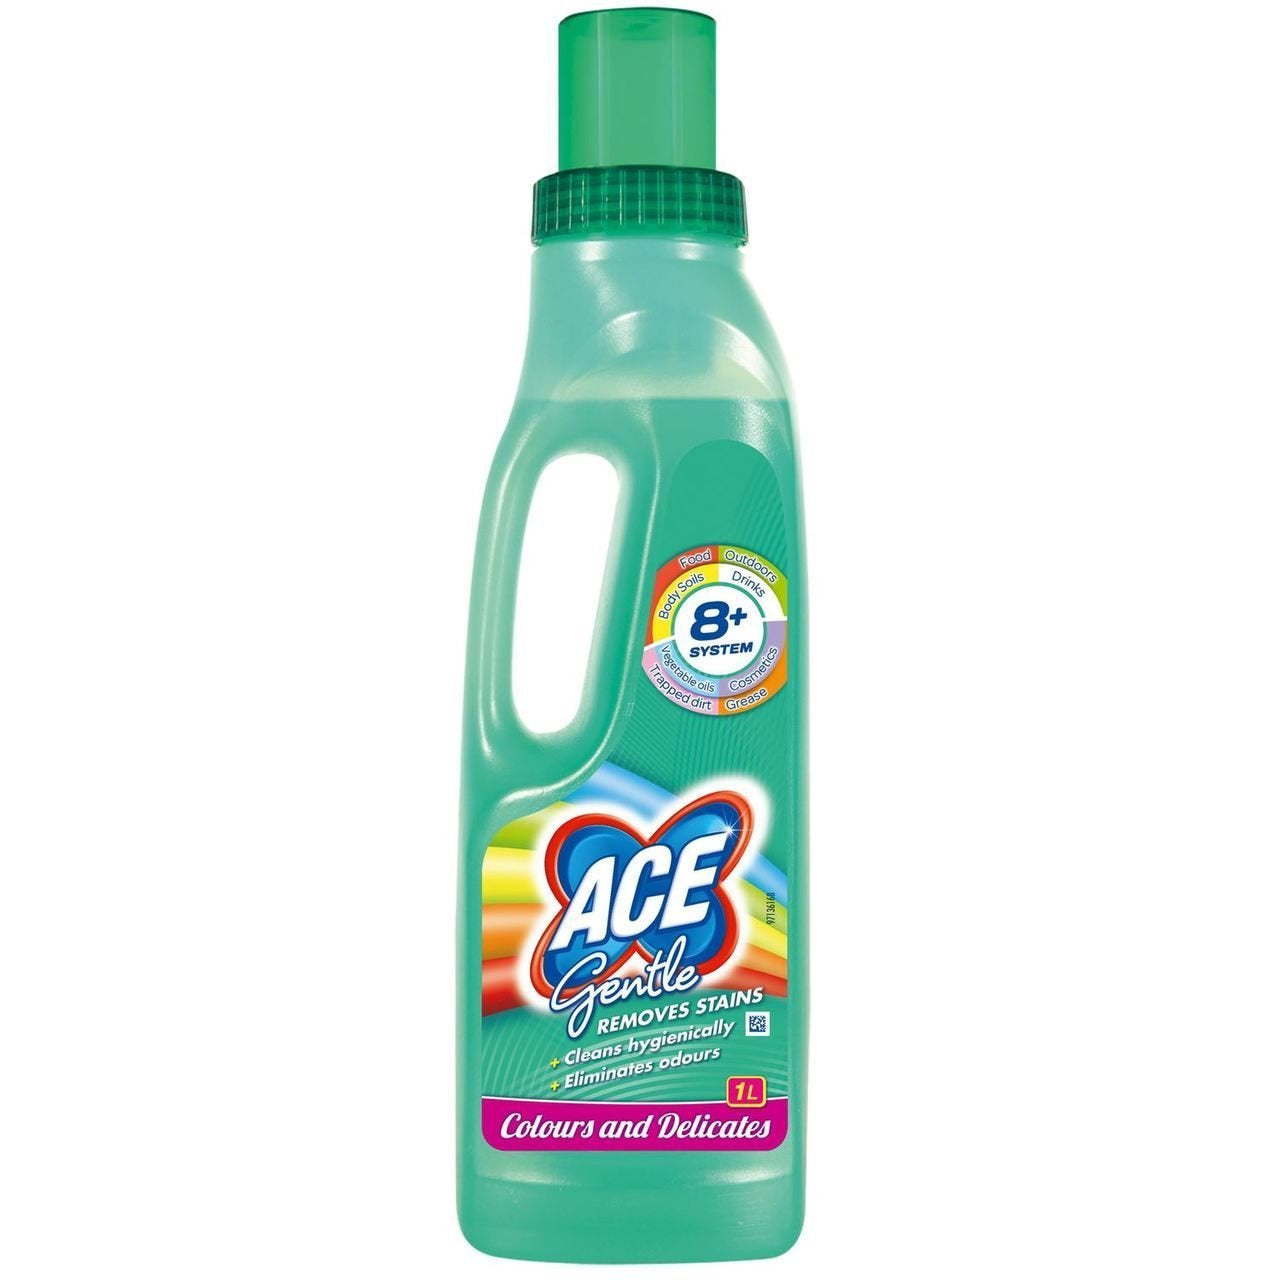 Ace Gentle Stain Remover 1l